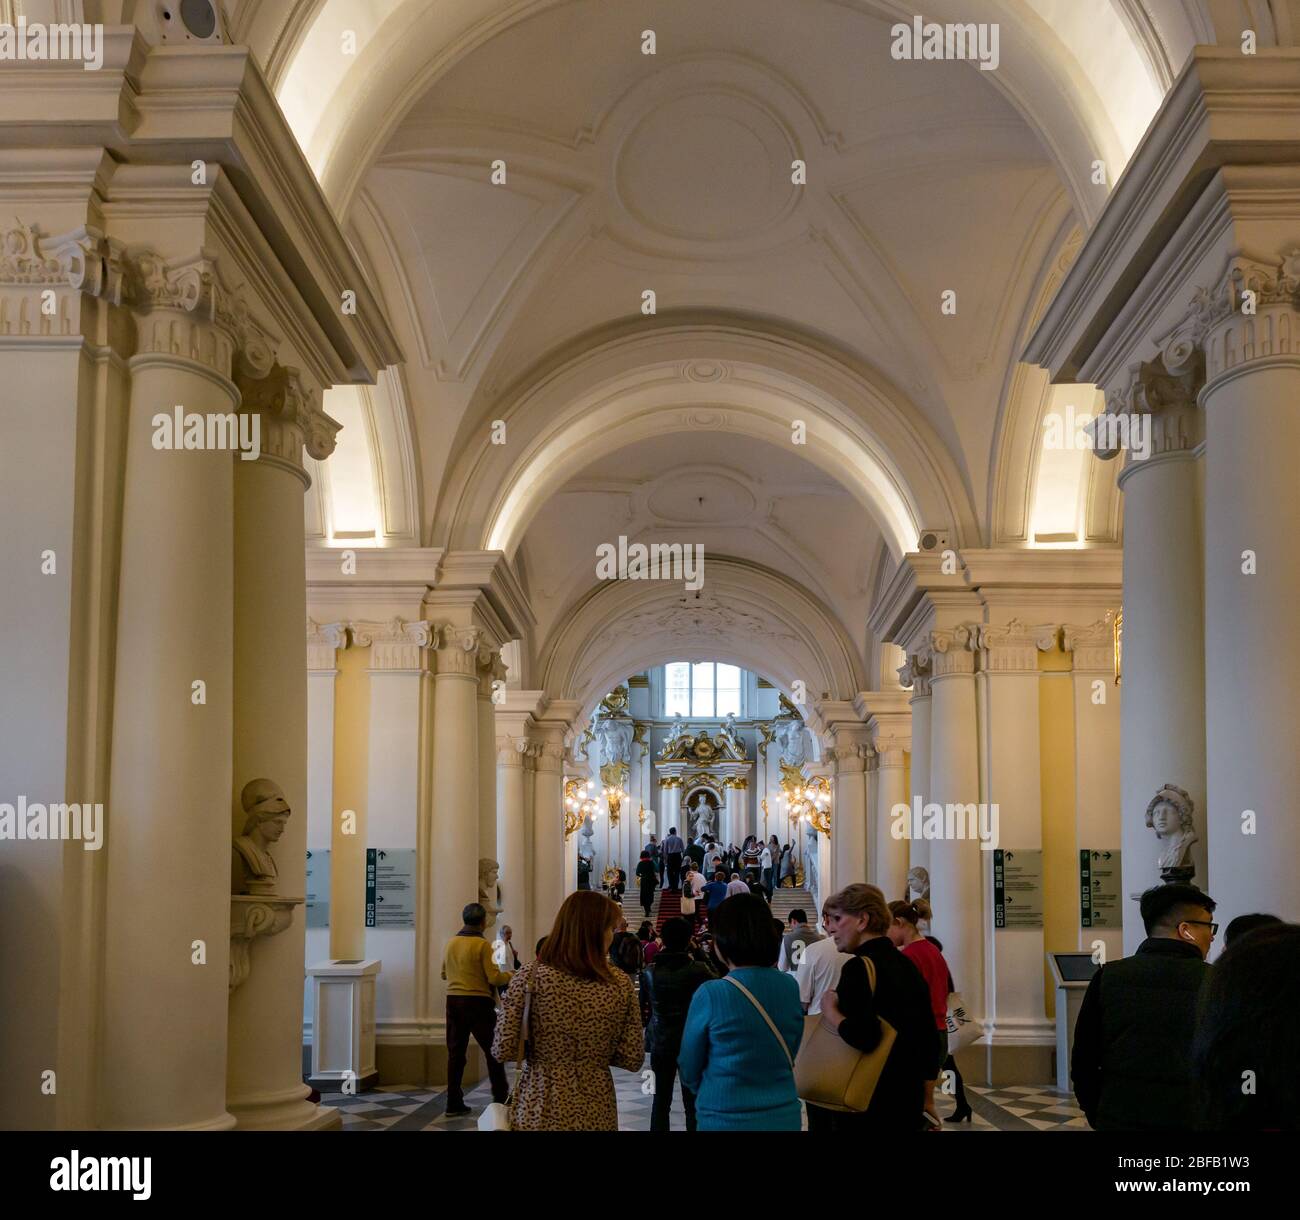 Visitors in corridor leading to Jordan or Ambassadors grand staircase, Hermitage State Museum, St Petersburg, Russian Federation Stock Photo